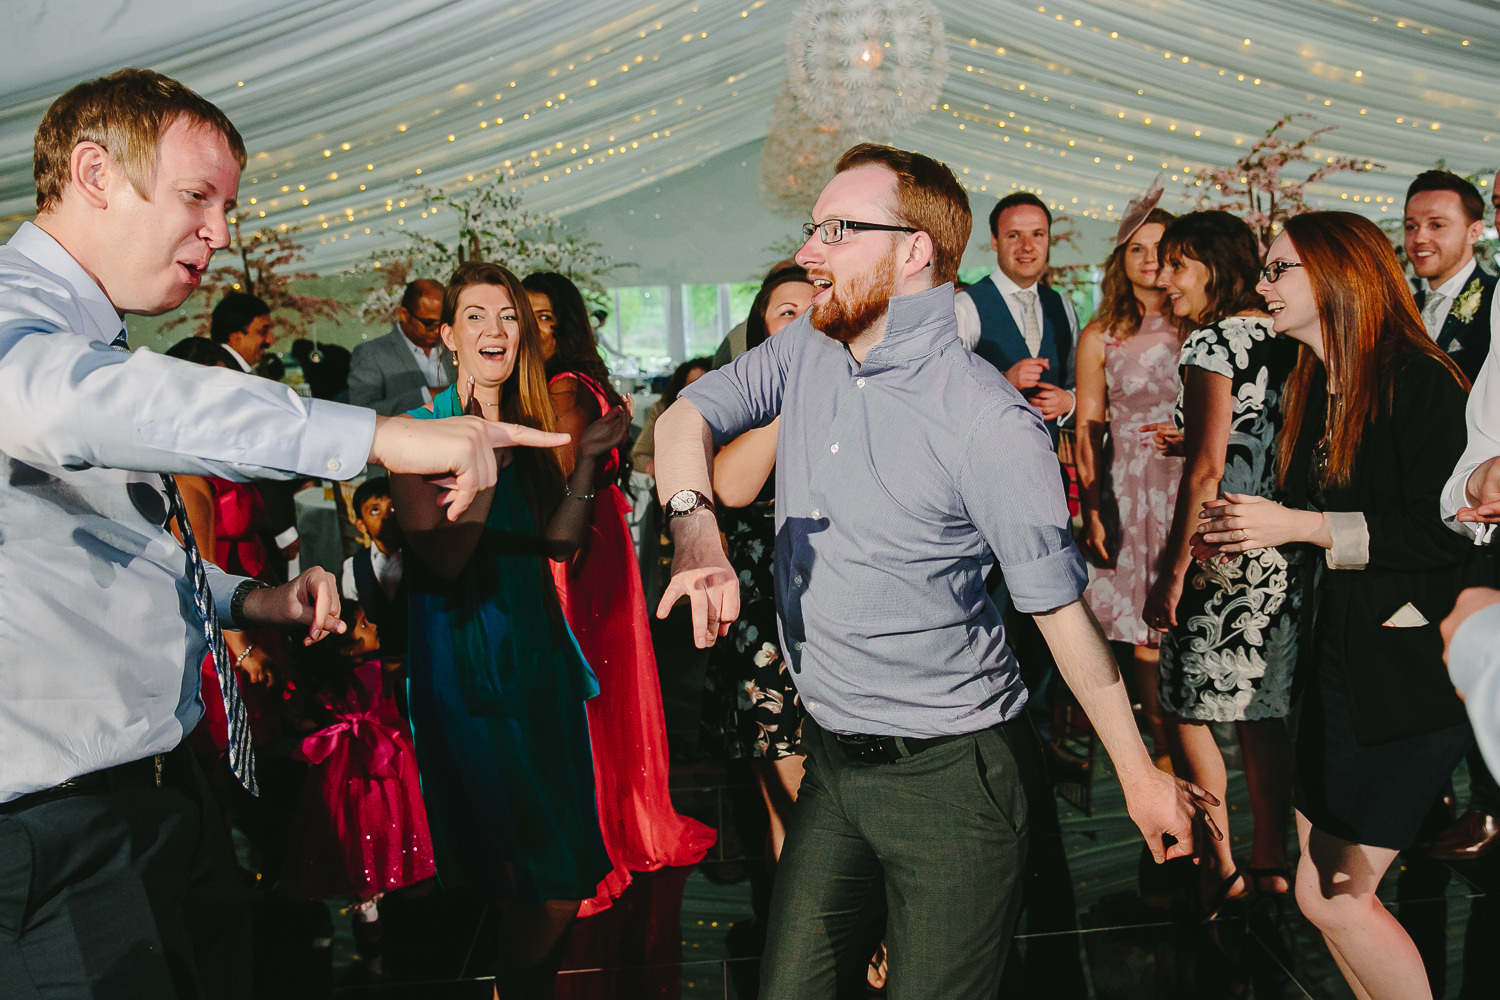 People Dancing at a wedding